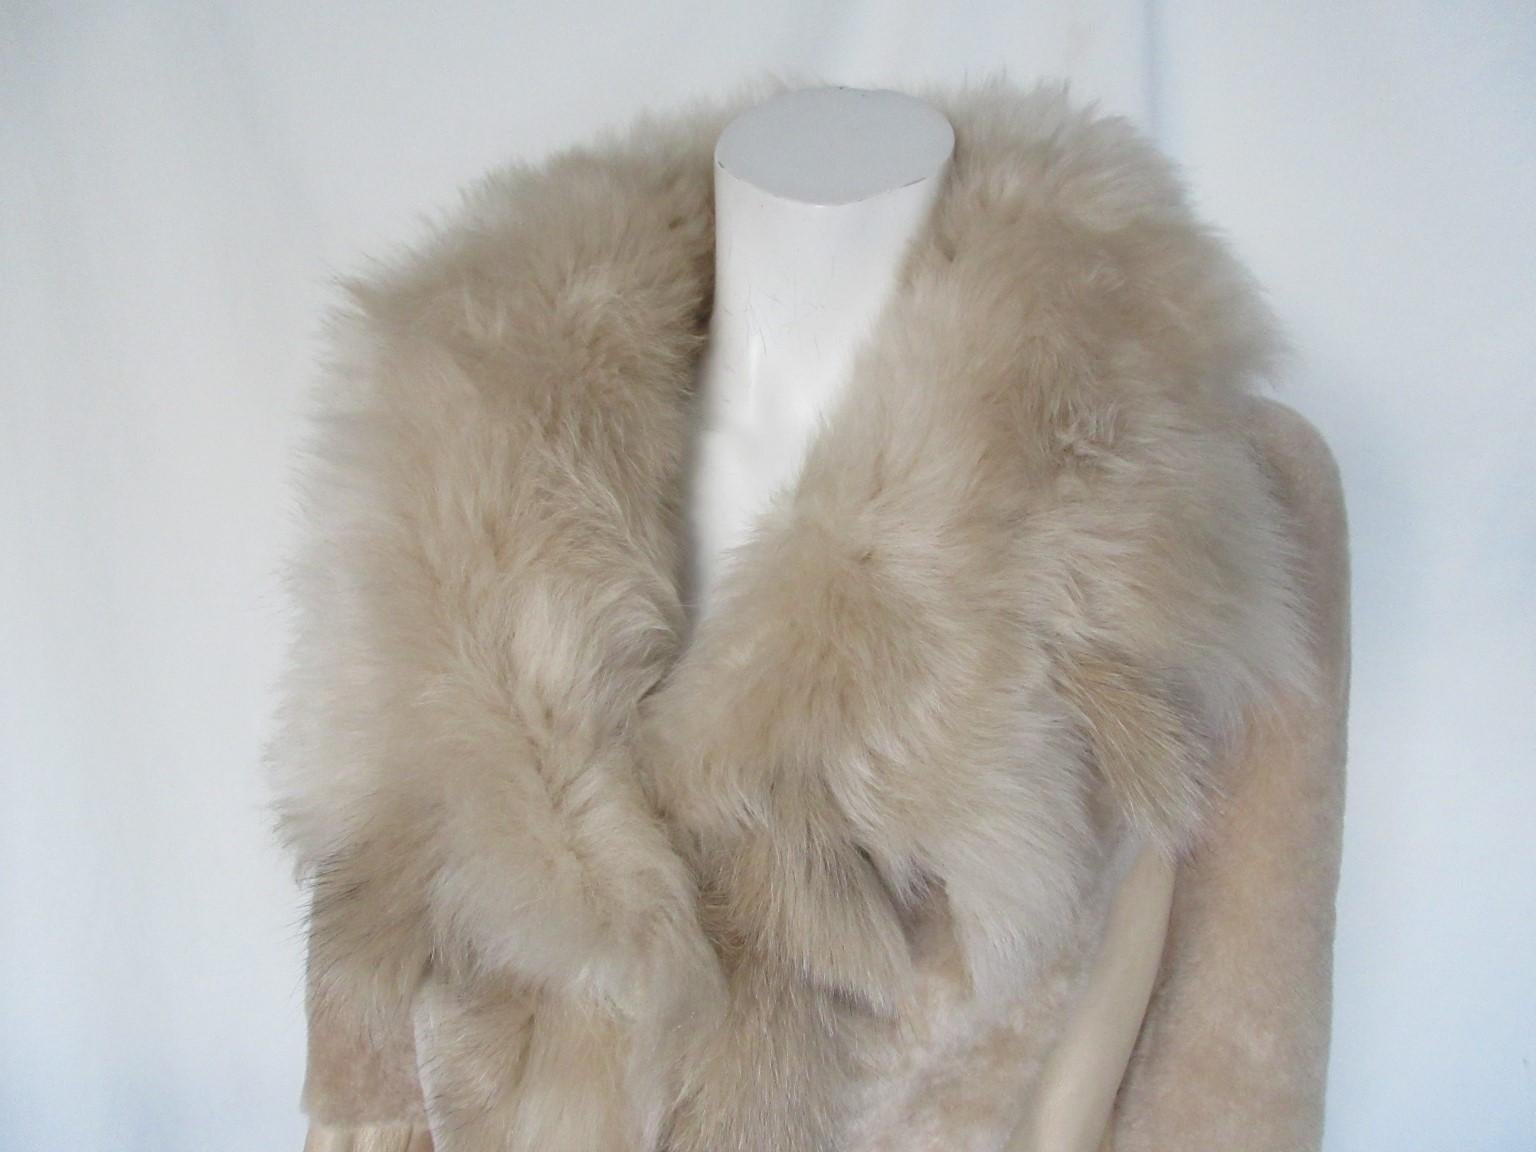 Super soft quality suede/leather tuscany lamb long coat 

We offer more exclusive fur items, view our frontstore

Details:
Mix & match leather/ shearling/mouton retournee
Color of leather is shiny pearl tone
With 2 pockets and 4 closing